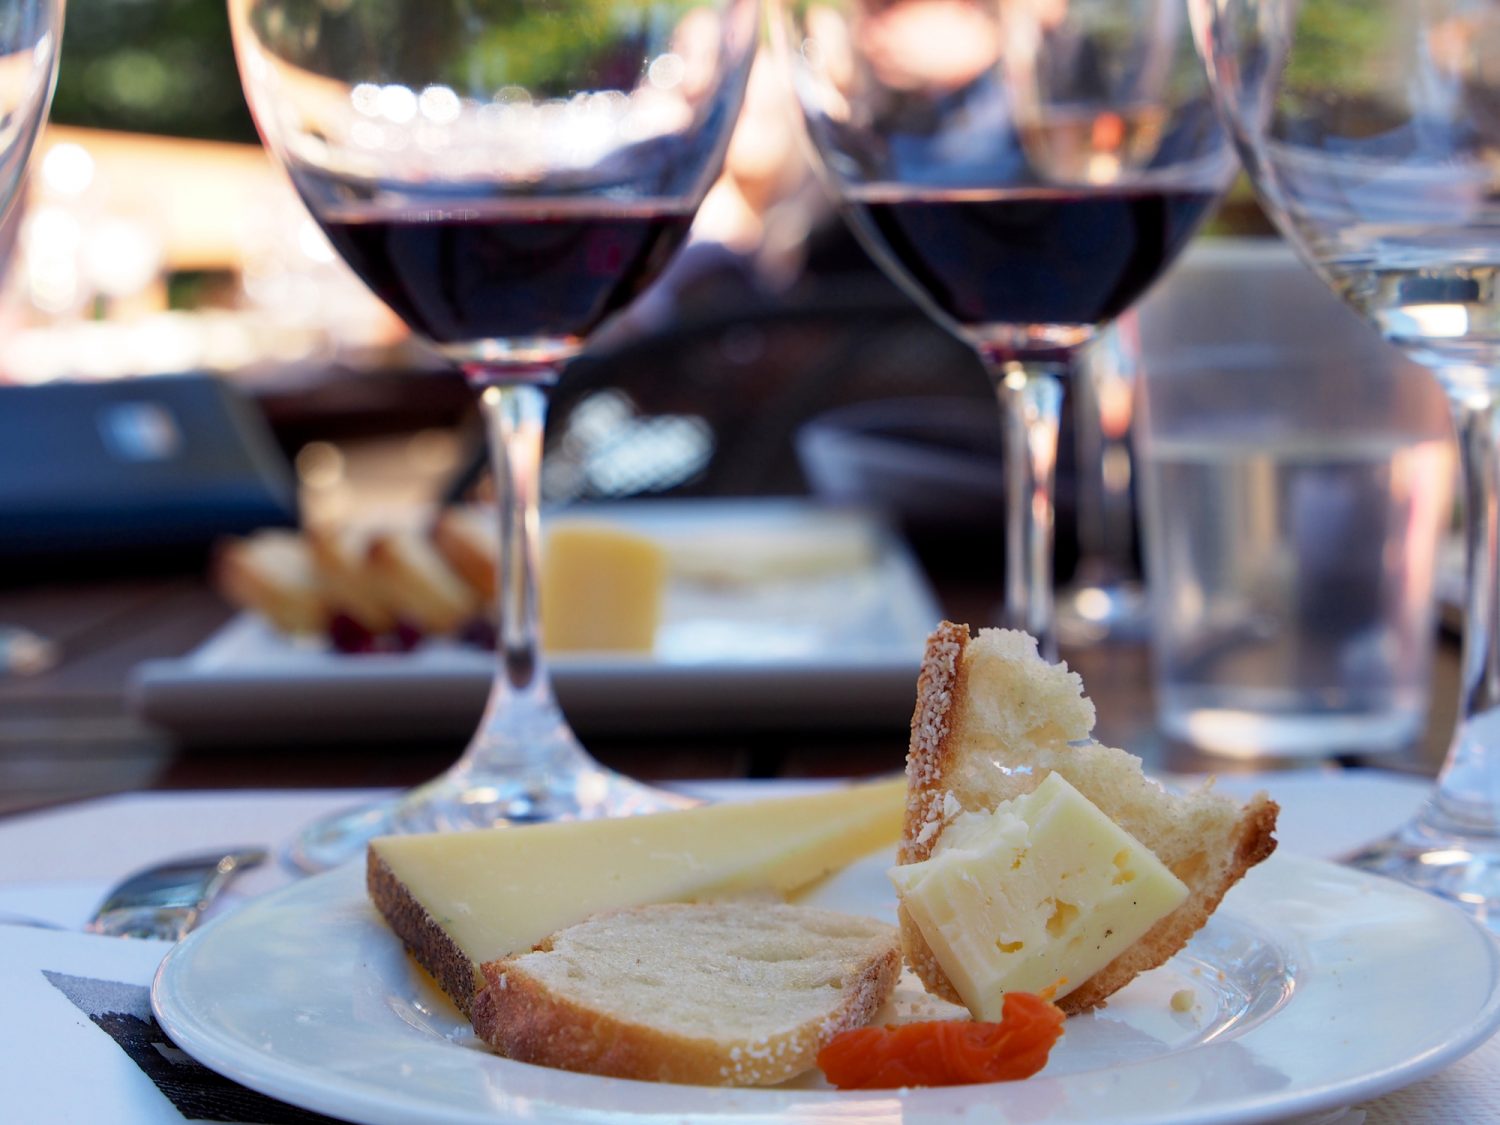 Learn about wine at a tasting in Napa Valley